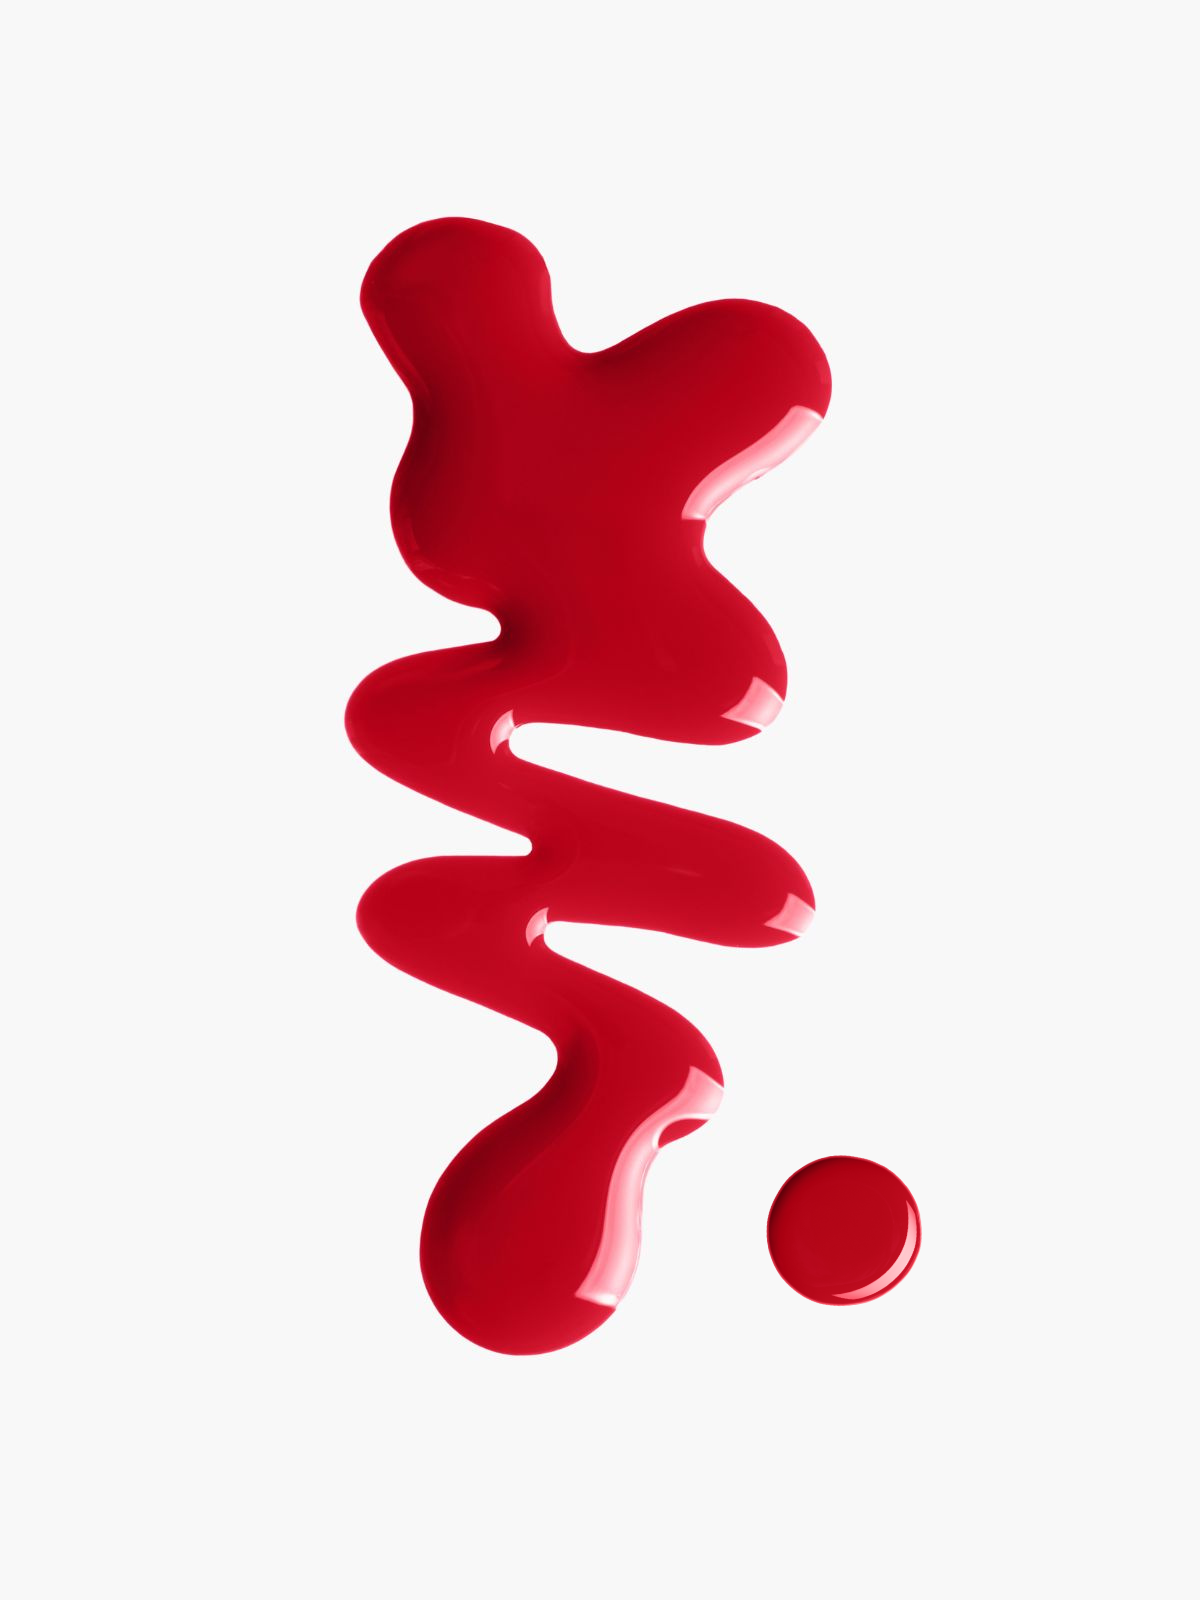 NUI_Nailcolor_Mood_02_red_2.png